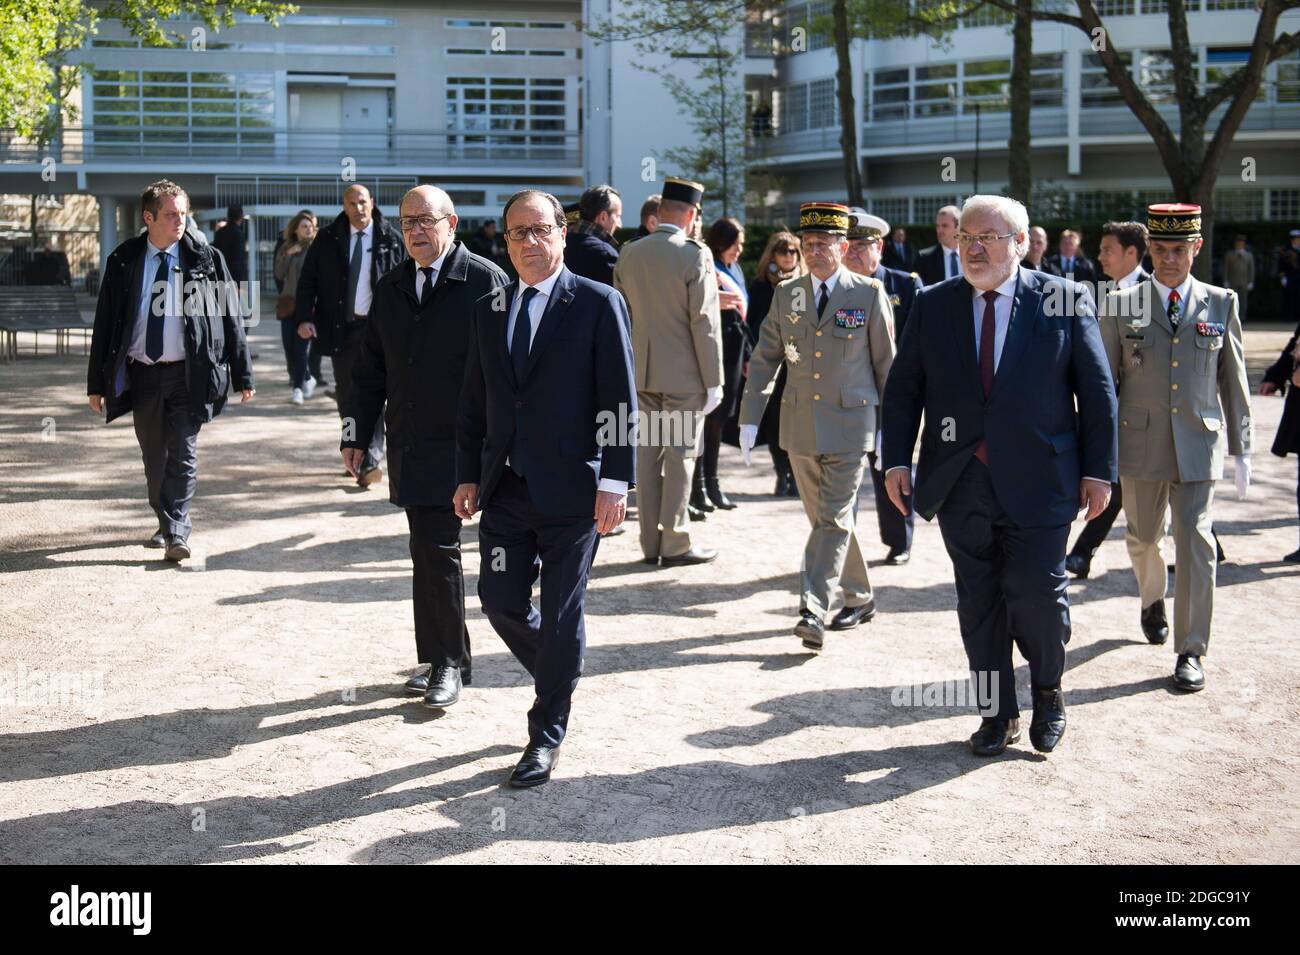 French President Francois Hollande with Minister of Defence Jean-Yves Le Drian and Secretary of State for Veterans and Remembrance Jean-Marc Todeschini, inaugurates a memorial in honor of French soldiers killed in foreign military operations (OPEX), at Parc Andre Citroen in Paris, France on April 18, 2017. Photo by Eliot Blondet/ABACARESS.COM Stock Photo